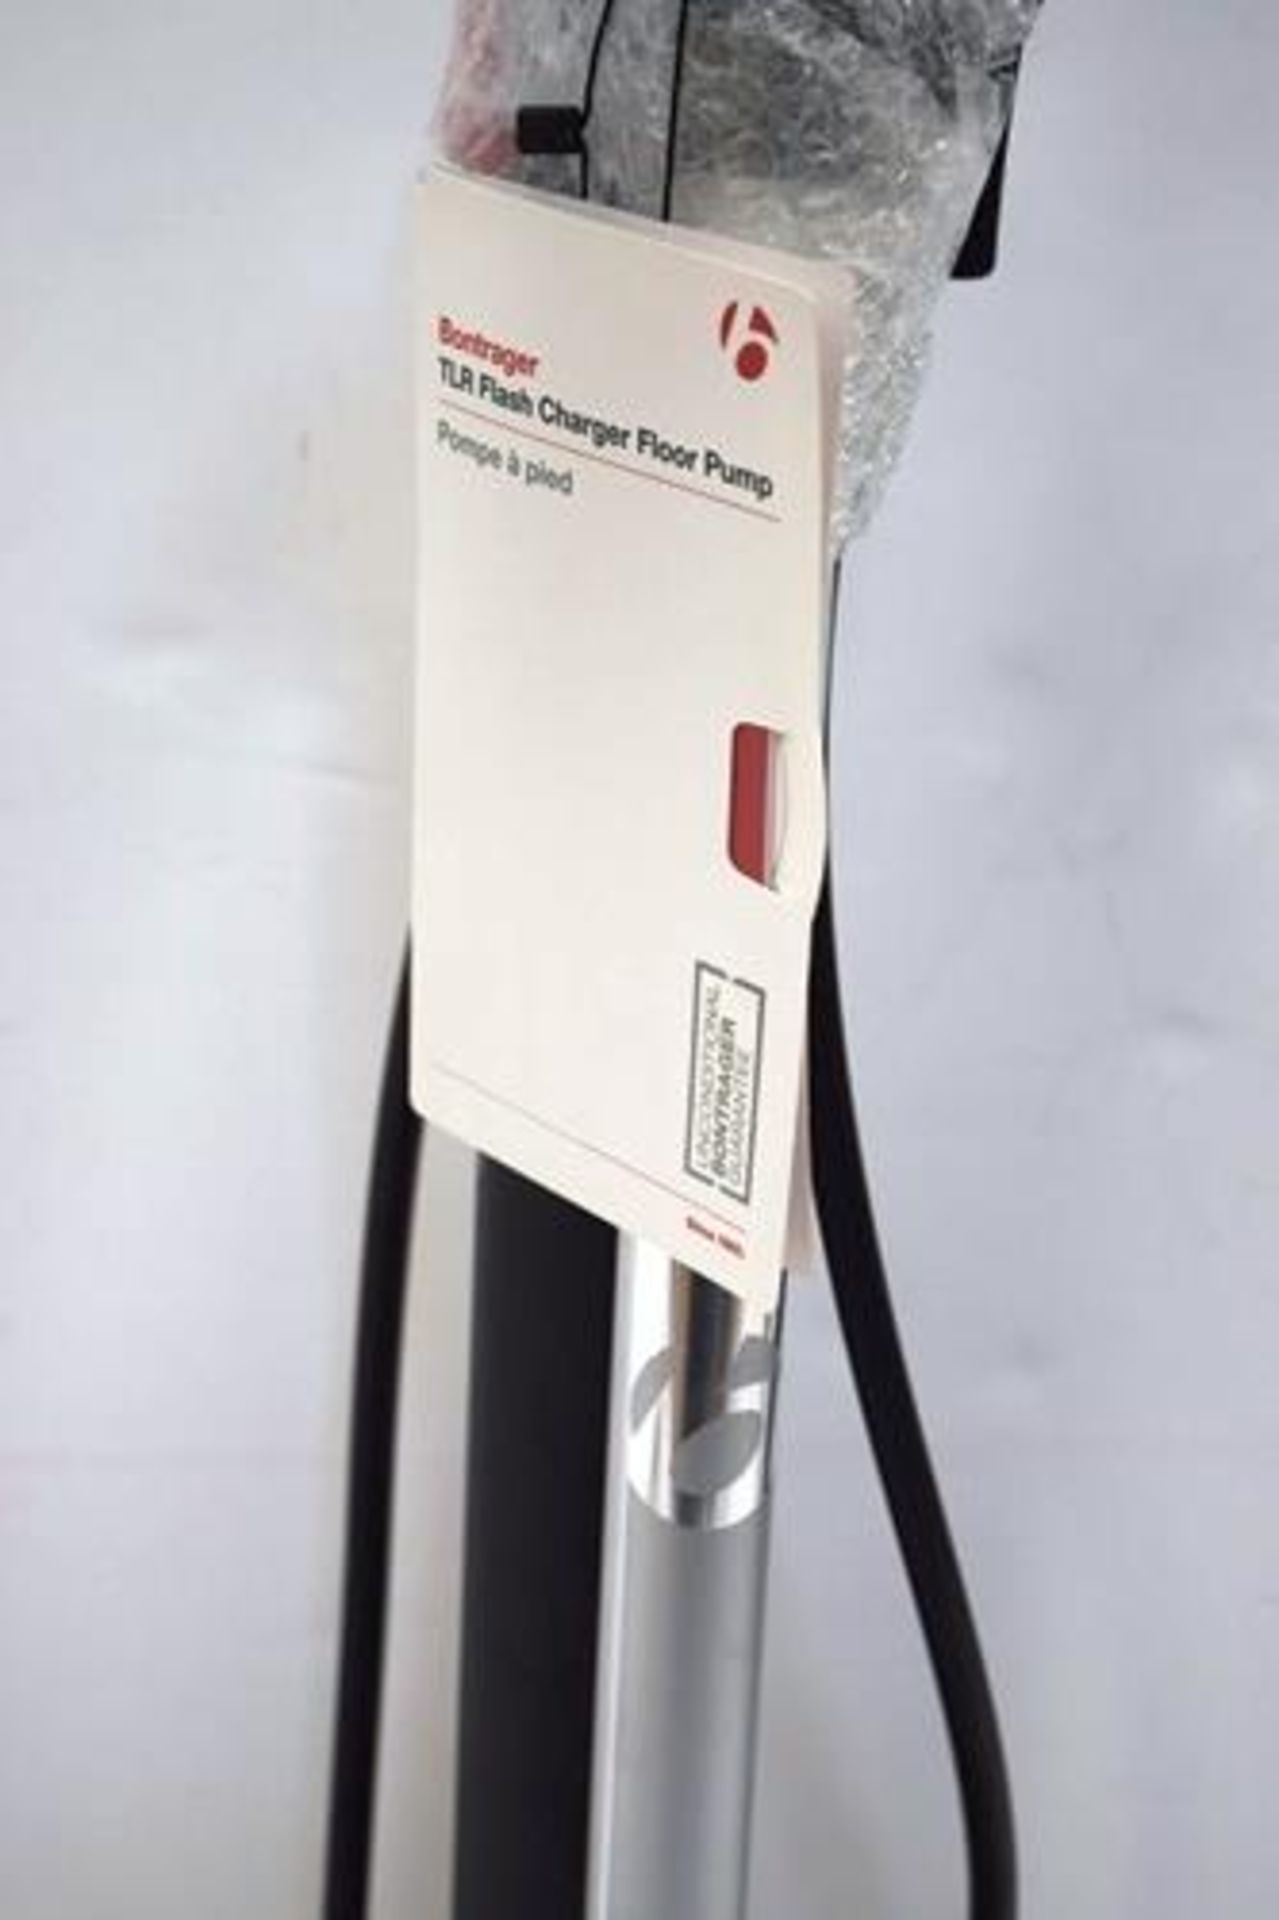 1 x Bontrager TLR flash charger floor pump - New with tags (ES10) - Image 2 of 2